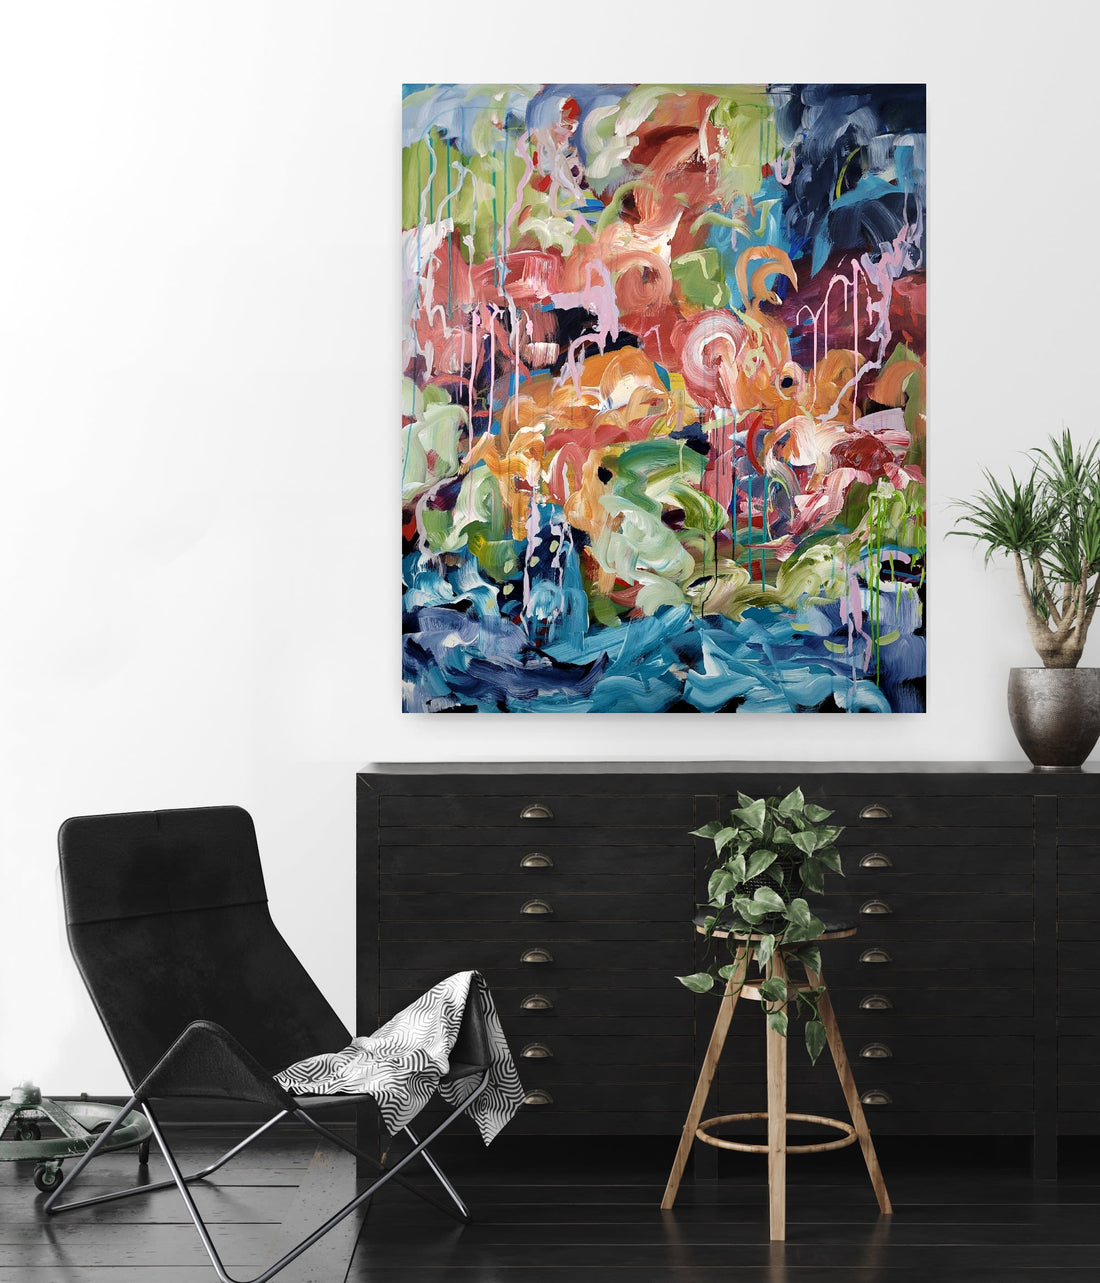 "Flamingo Paradise" by Marianne Nielsen brings colour and abstract art to this neutral interior space.